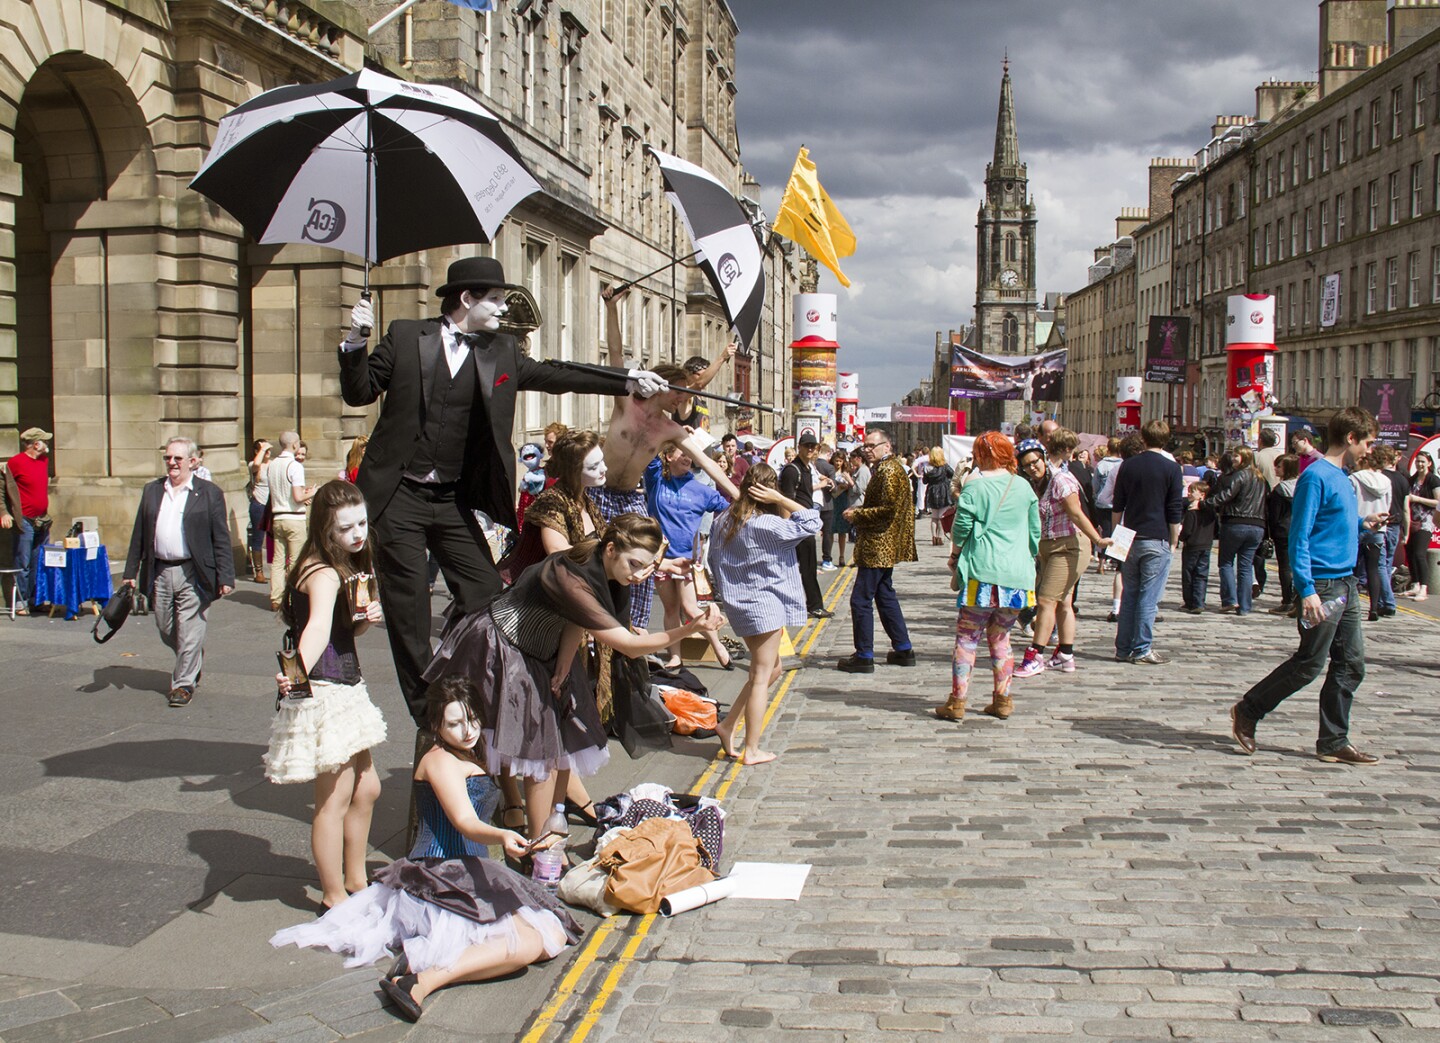 <h2>3. Edinburgh, Scotland</h2> <p><b>August is great for: </b>Spotting the next Oscar winner making a live debut.</p> <p>Think of the<a class="Link" href="https://www.edfringe.com/" rel="noopener"> Edinburgh Festival Fringe</a> as a combination of Broadway,<i> Saturday Night Live, </i>and <a class="Link" href="https://groundlings.com/" rel="noopener">the Groundlings</a>—a comedy-skewing live performance fiesta with more than 3,000 shows taking place across 250 venues over almost four weeks (from August 2 to 26 this year). The dizzyingly<a class="Link" href="https://www.edfringe.com/" rel="noopener"> full schedule</a> is constantly updated, so download its app for the easiest planning.</p> <p>By far the world’s largest performing arts festival, the Fringe was established soon after World War II. Since then, it’s proved a spotting ground for future superstars at the earliest stages of their careers. It cost intrepid festivalgoers just a few pounds to see the likes of the late Alan Rickman (aka Professor Snape from the <i>Harry Potter</i> film series), Mr. Bean actor Rowan Atkinson, and comedian turned chat show host Graham Norton make their debuts here in the past. Many of this year’s emerging talents will likely follow in their fame-finding footsteps.</p> <h3>Where to stay: Prestonfield House</h3> <ul>   <li><b>Book now: </b><a class="Link" href="https://www.prestonfield.com/" rel="noopener">Prestonfield House</a></li>  </ul> <p>The location alone, right next to Arthur’s Seat, makes this <a class="Link" href="https://www.prestonfield.com/stay/" rel="noopener">23-room boutique hotel</a> compelling, but its lush, maximalist decor and the romance of crashing in a building that dates back to the 17th century—not to mention its own, <a class="Link" href="https://www.prestonfield.com/about-us/home-gardens/" rel="noopener">20-acre gardens</a>—are the clinchers.</p> <h3>How to get to Edinburgh</h3> <p>You’re in luck: There’s a range of options in summer for direct nonstop flights, whether United from EWR, Delta from BOS, or even Virgin Atlantic from MCO.</p>